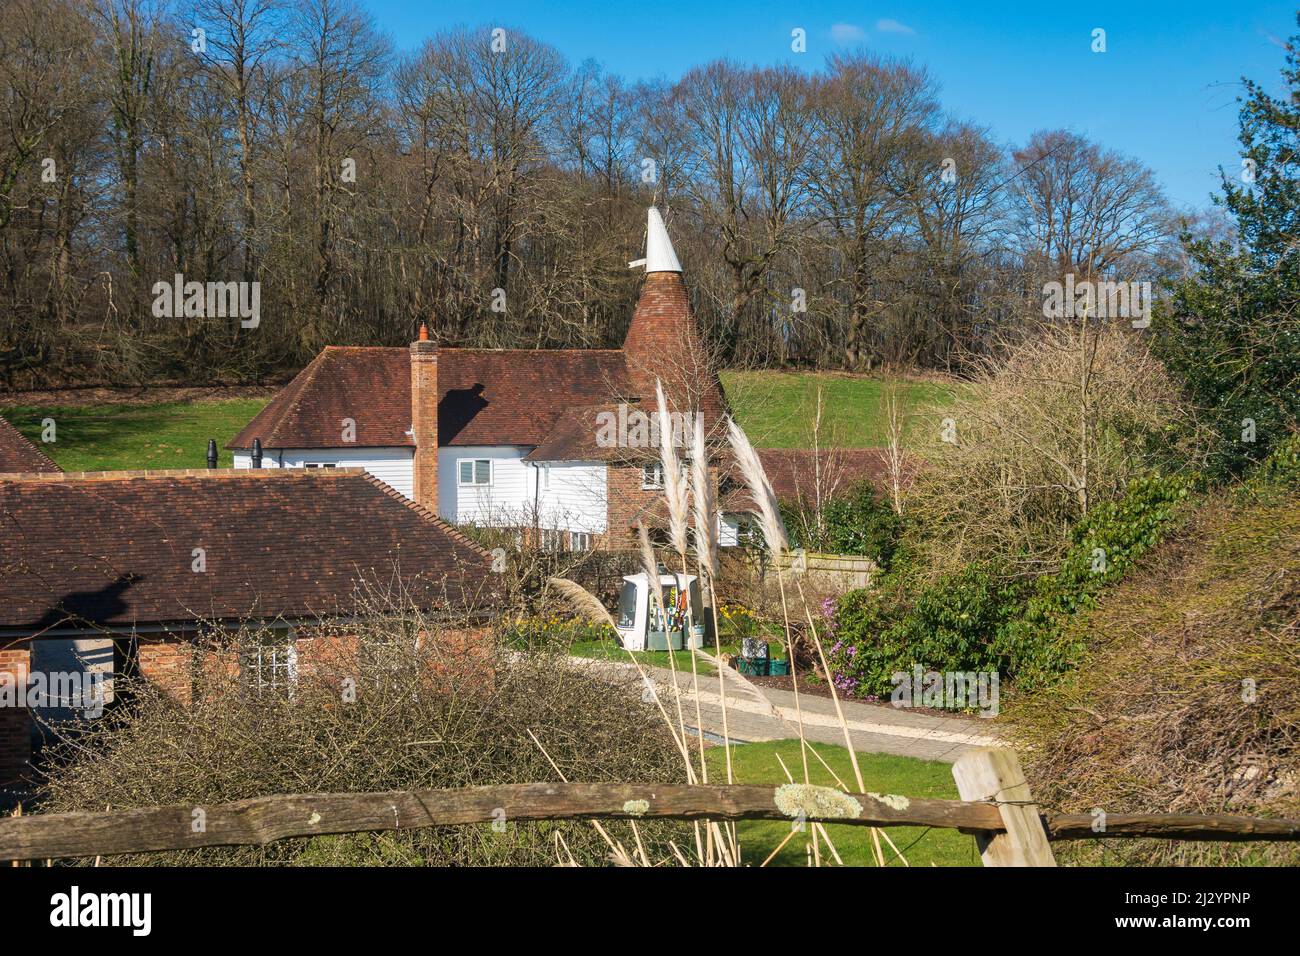 The Hamlet of Friezley near Cranbrook in Kent, has attractive cottages related to historic agriculture, Kent, UK Stock Photo